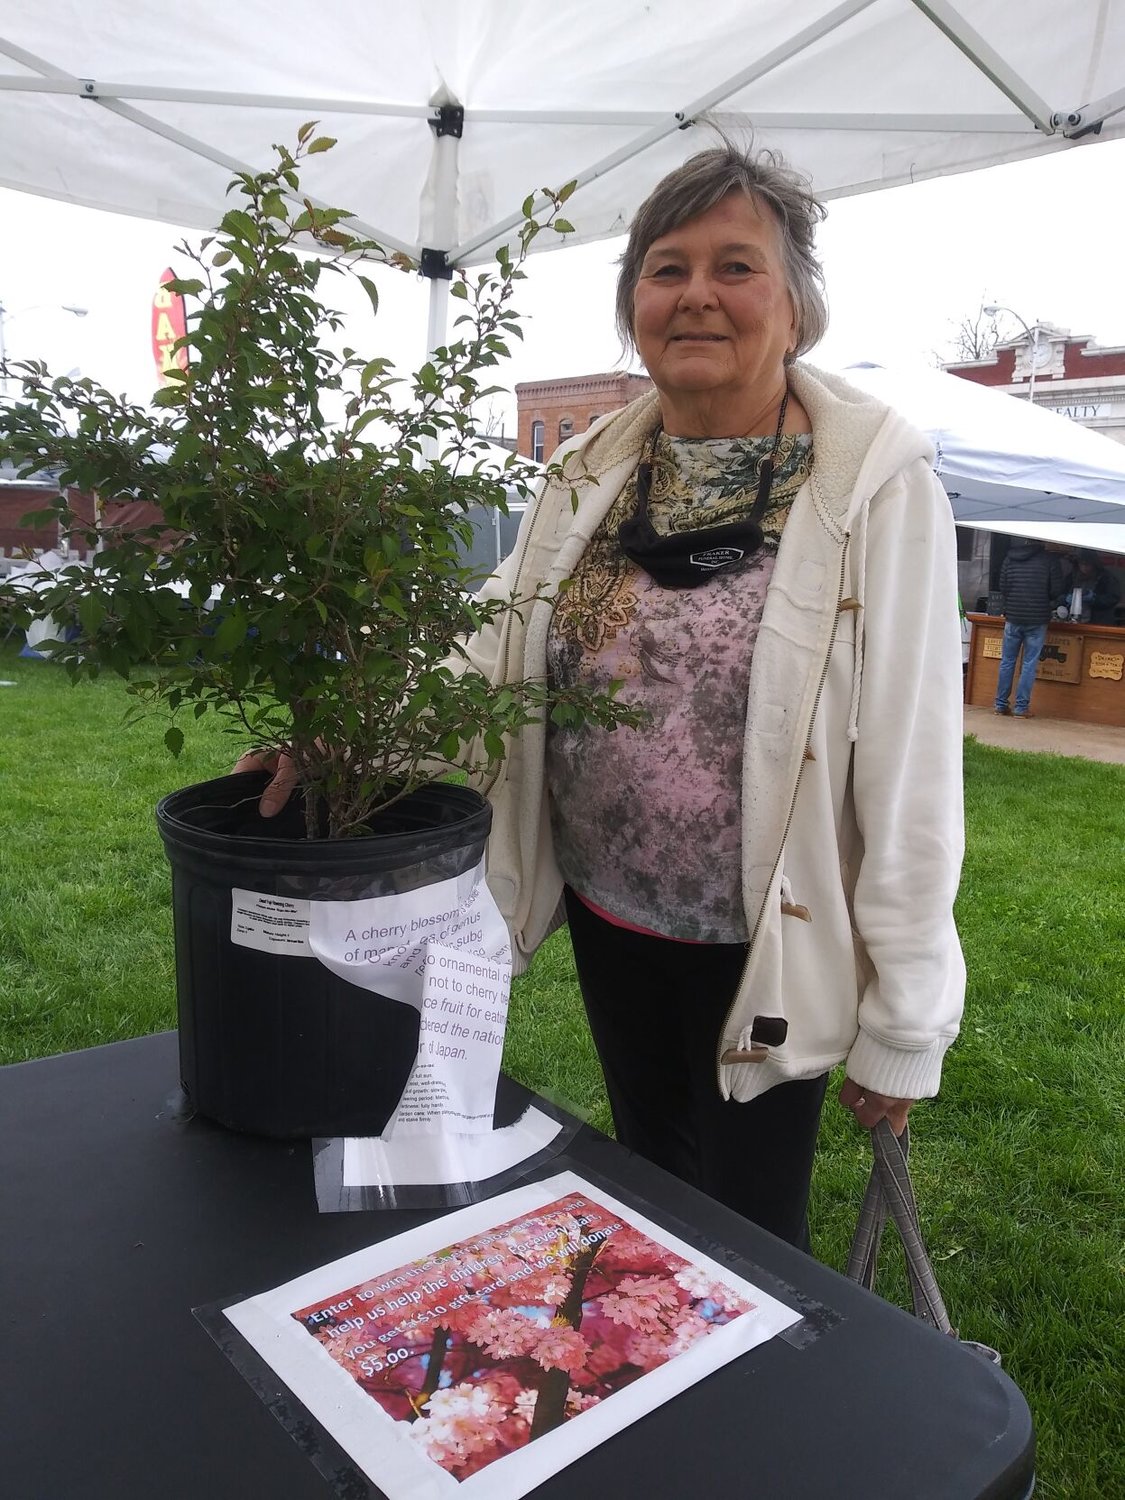 Edie Dunbar, a new subscriber to the Marshfield Mail, was the proud winner of our Cherry Blossom Tree giveaway. It was also her 73rd birthday, Saturday April 24. Happy birthday again, Edie. Congratulations on your new tree!